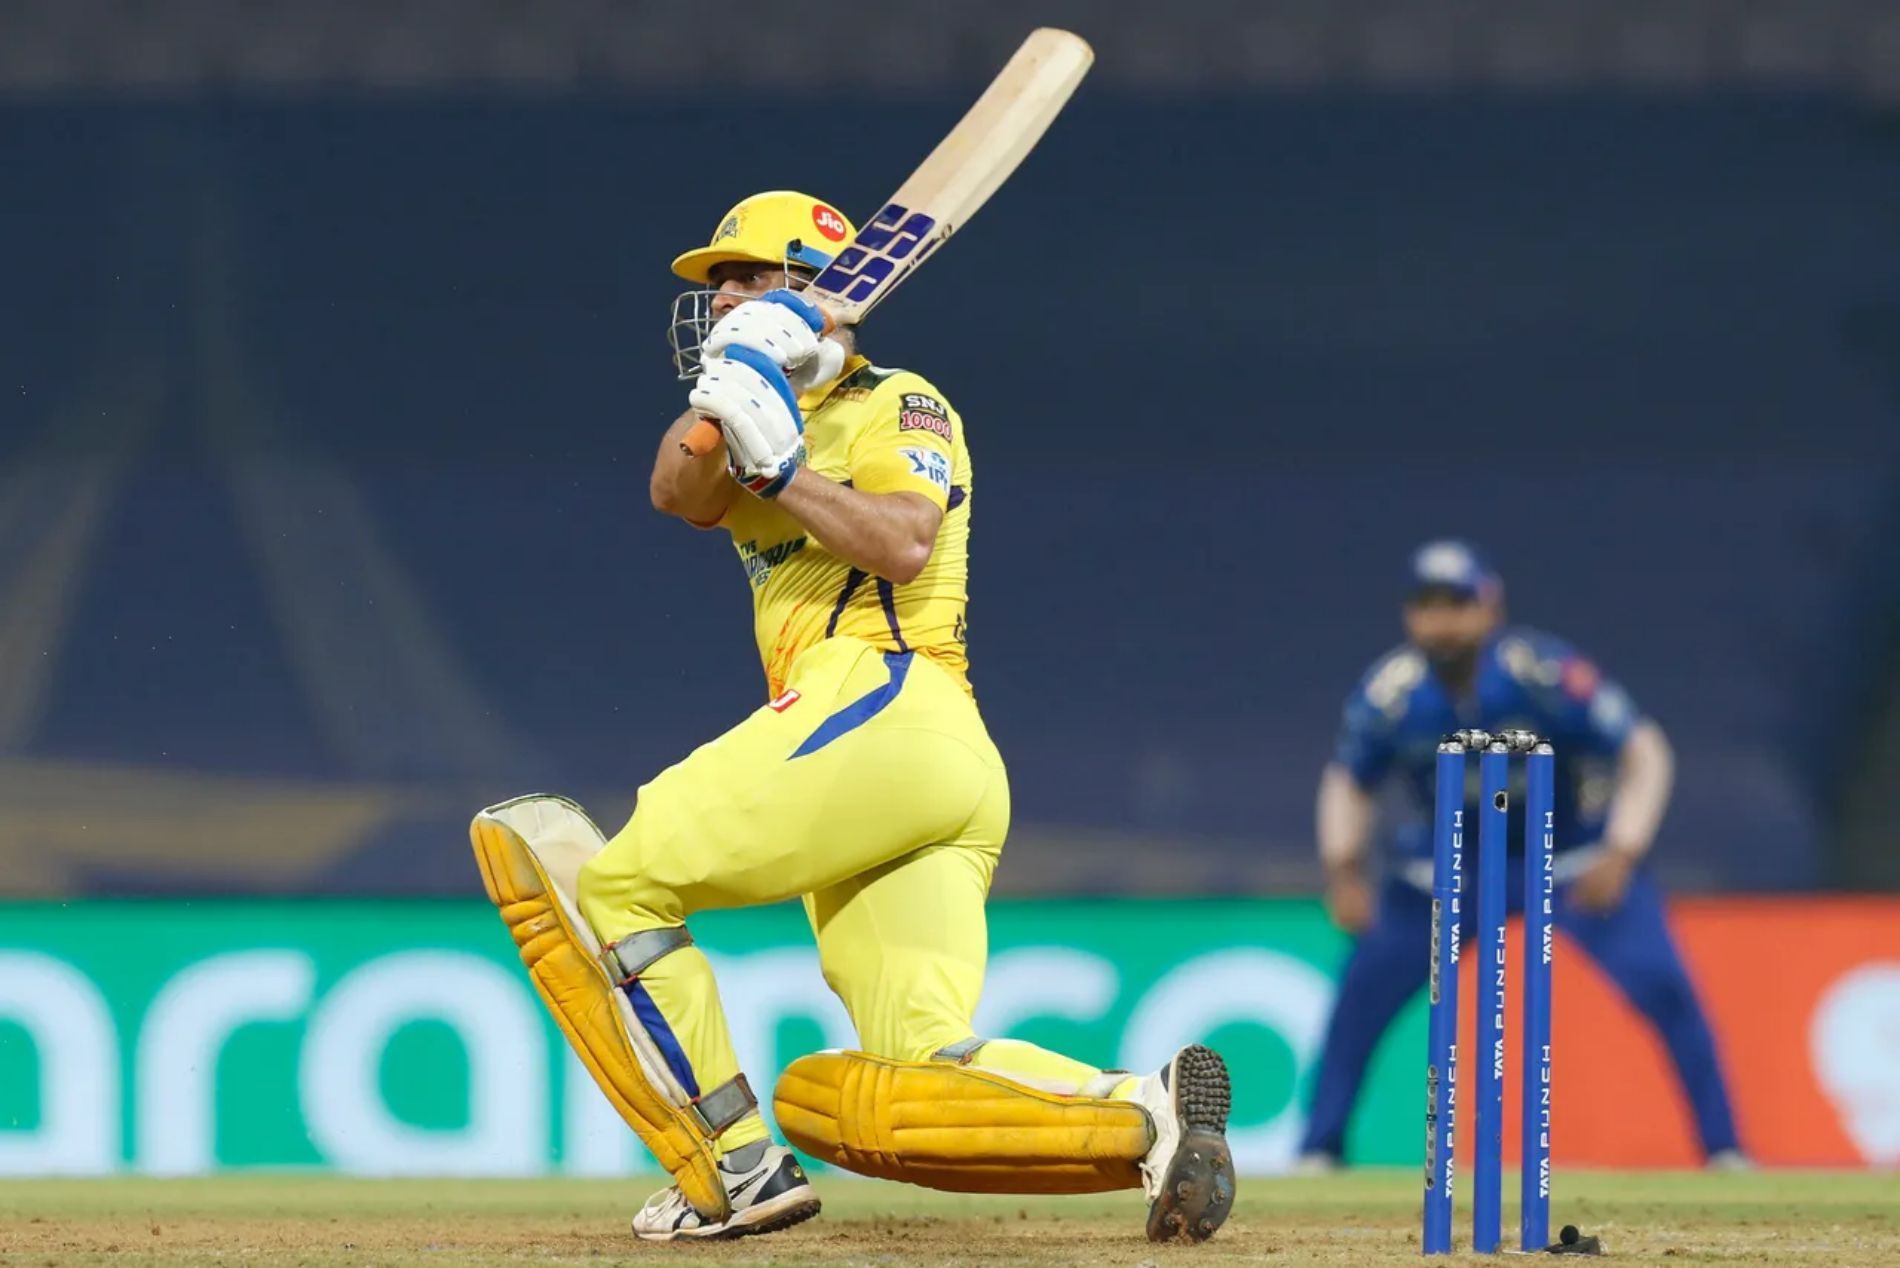 MS Dhoni finished yet another match for CSK. Pic: IPLT20.COM